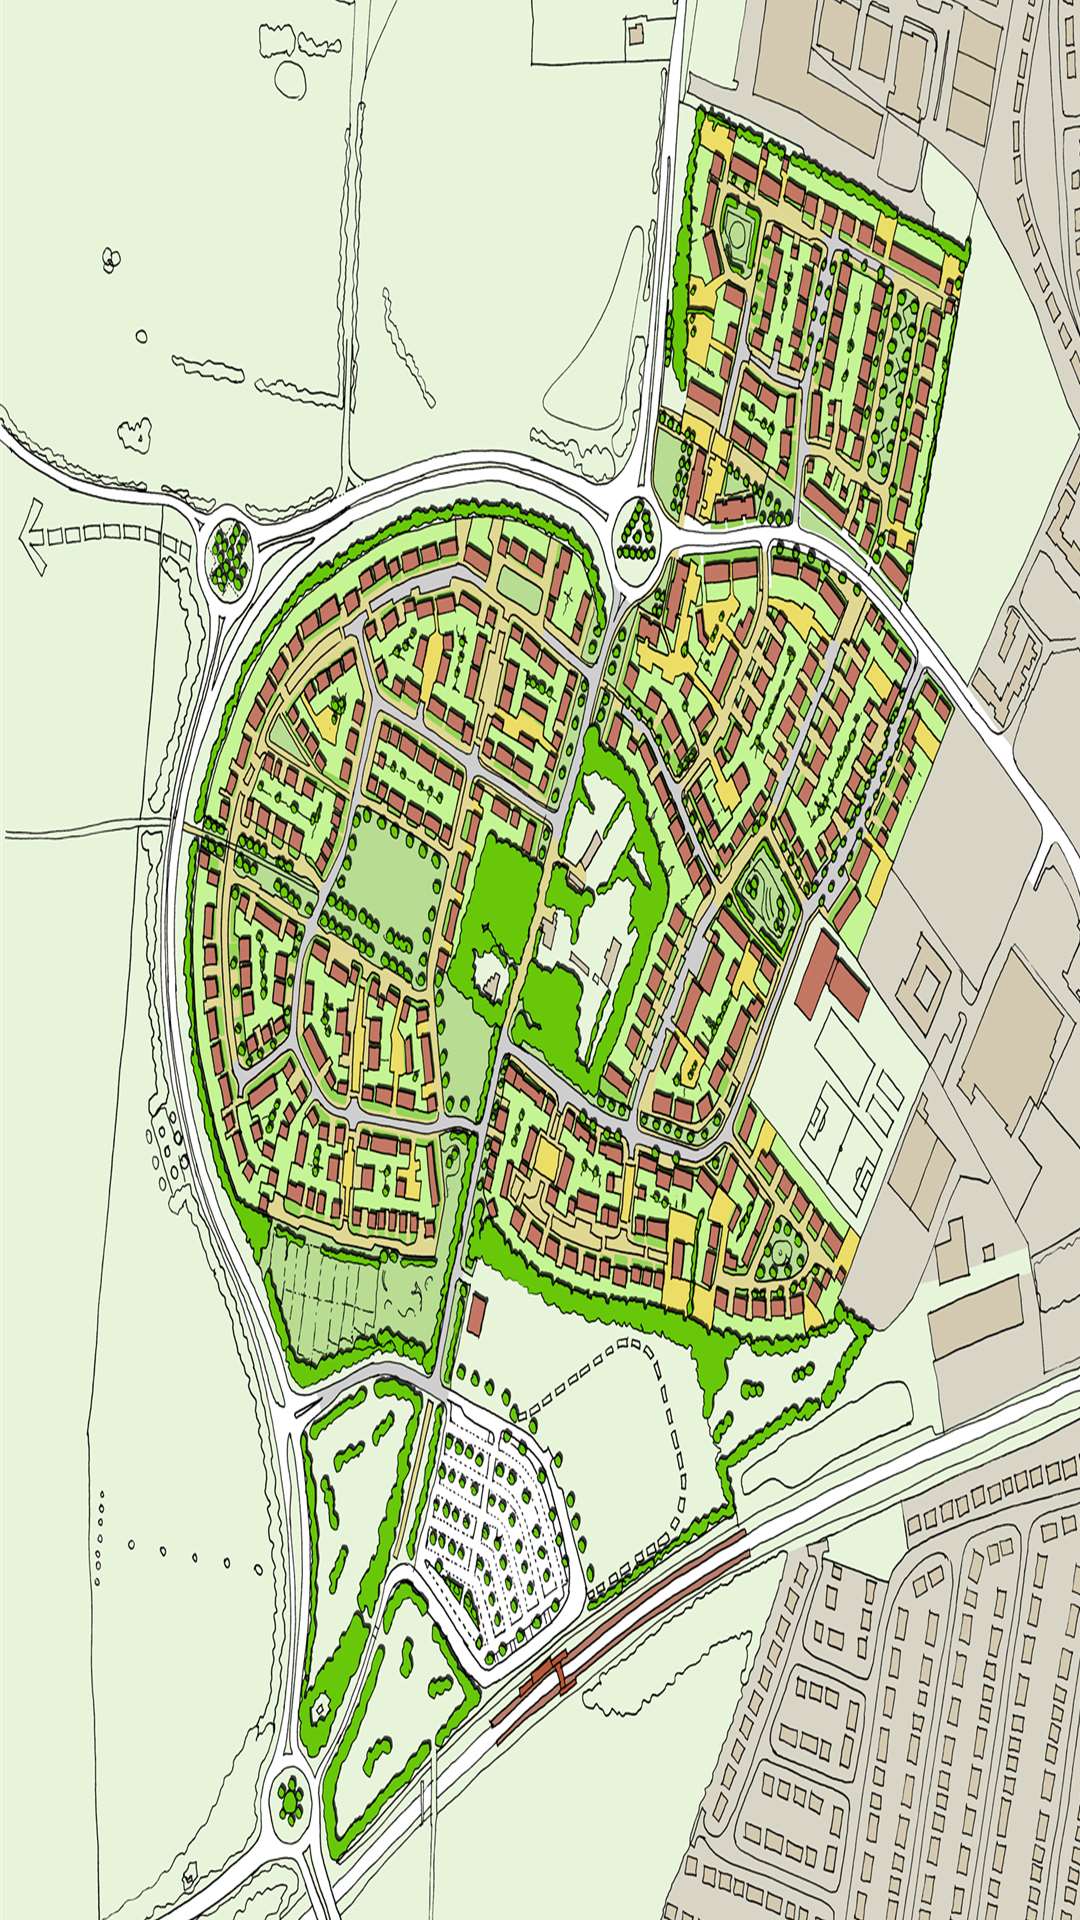 The master plan for the proposed Manston Green development